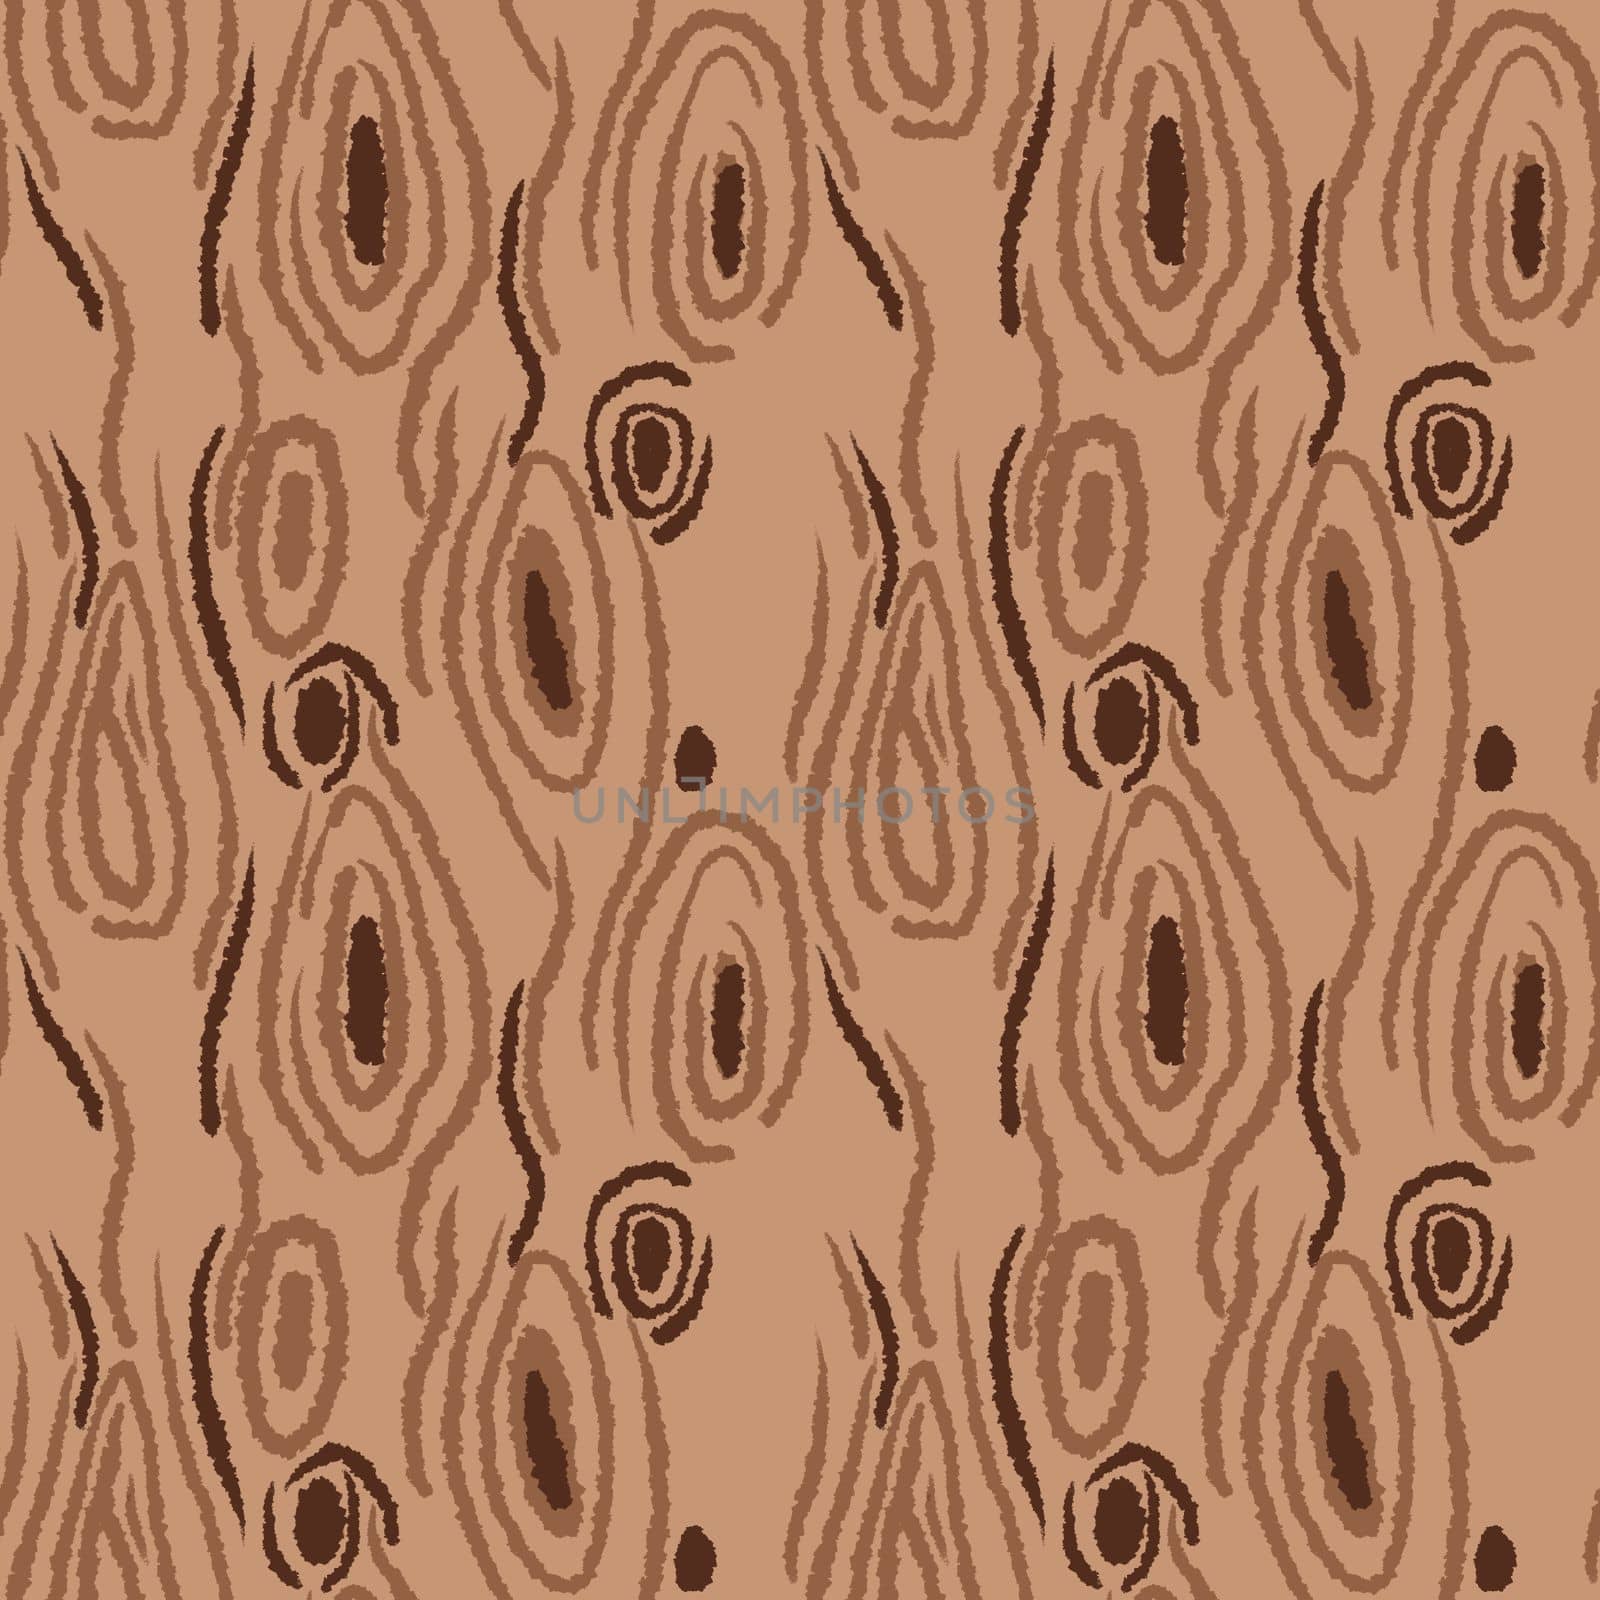 Hand drawn seamless pattern with wood board timber texture in beige brown. Natural old retro material oak pine plywood print, hardwood backdrop surface, vintage plank